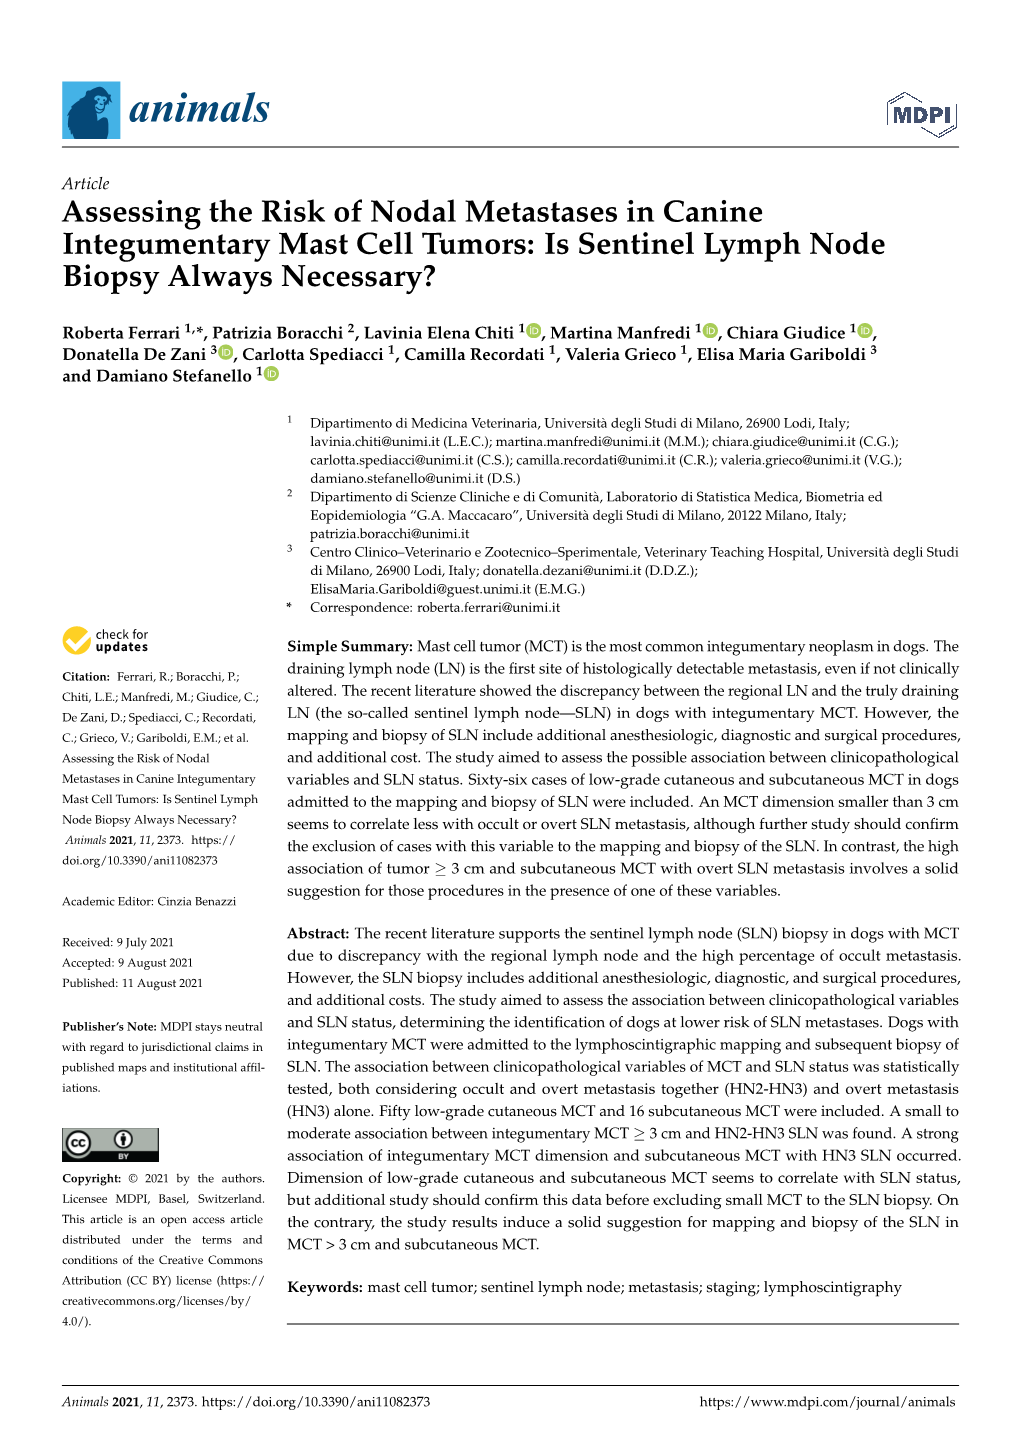 Assessing the Risk of Nodal Metastases in Canine Integumentary Mast Cell Tumors: Is Sentinel Lymph Node Biopsy Always Necessary?